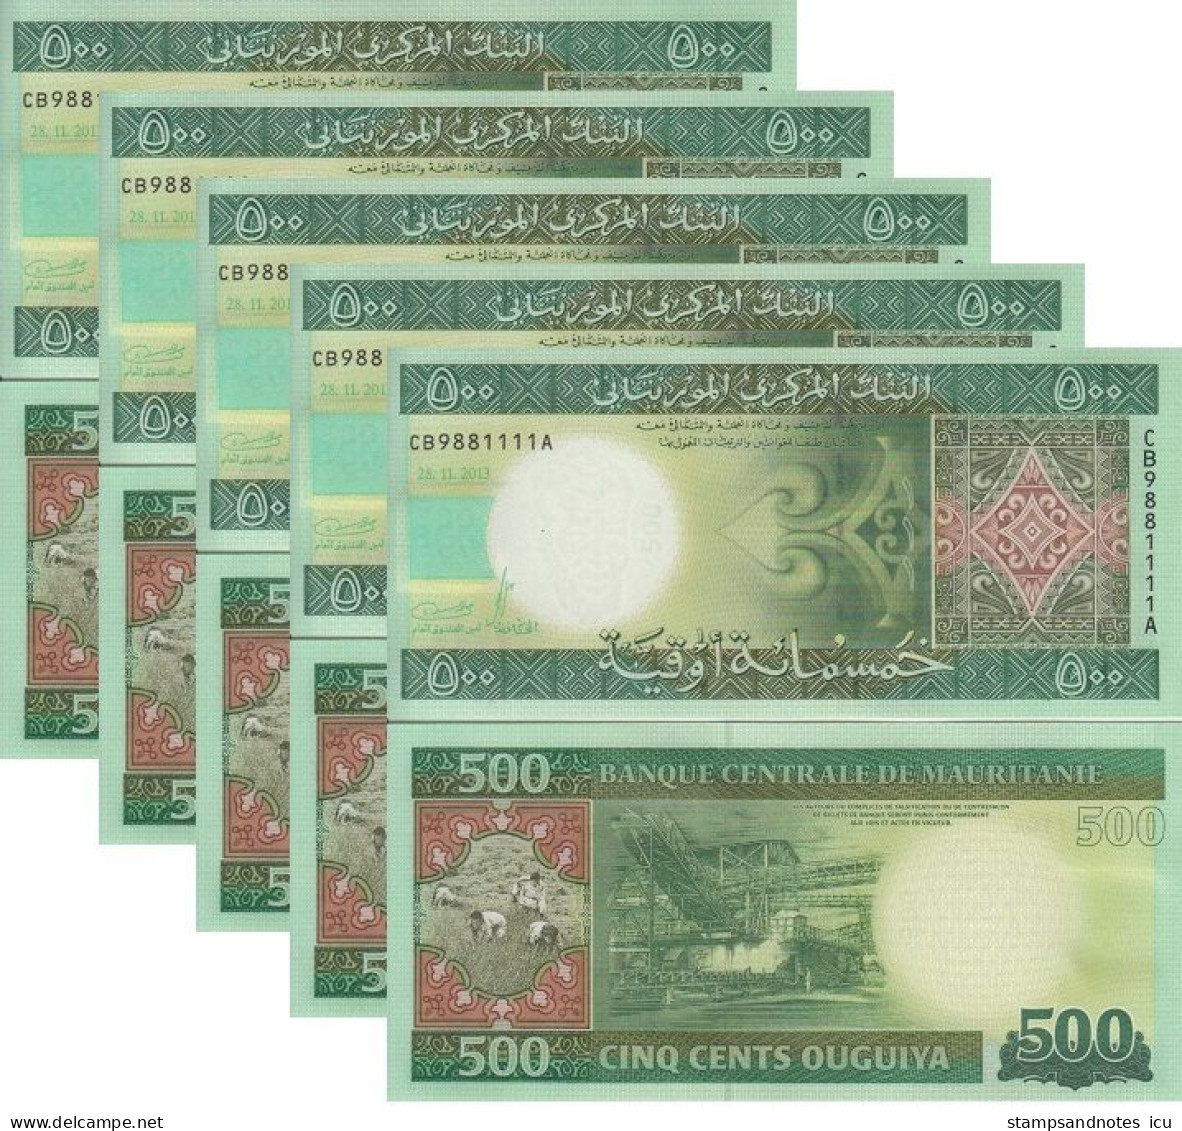 MAURITANIA 500 Ouguiya 2013 P 18 UNC X 5 Banknotes With Consecutive Serial Numbers - Mauritanie